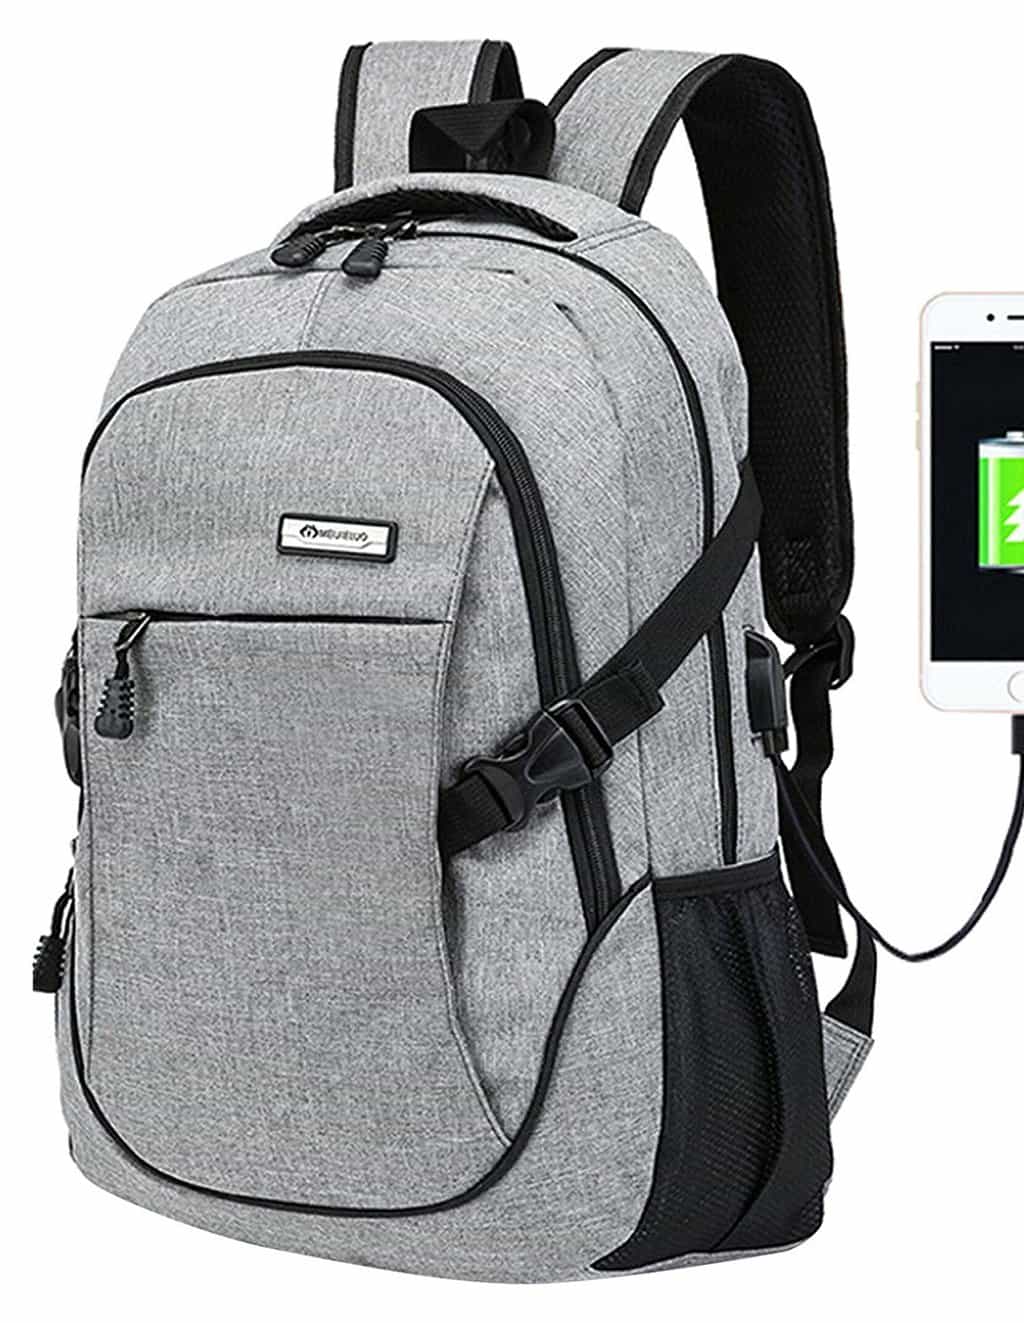 8 best laptop backpacks for gamers to protect your gaming gear